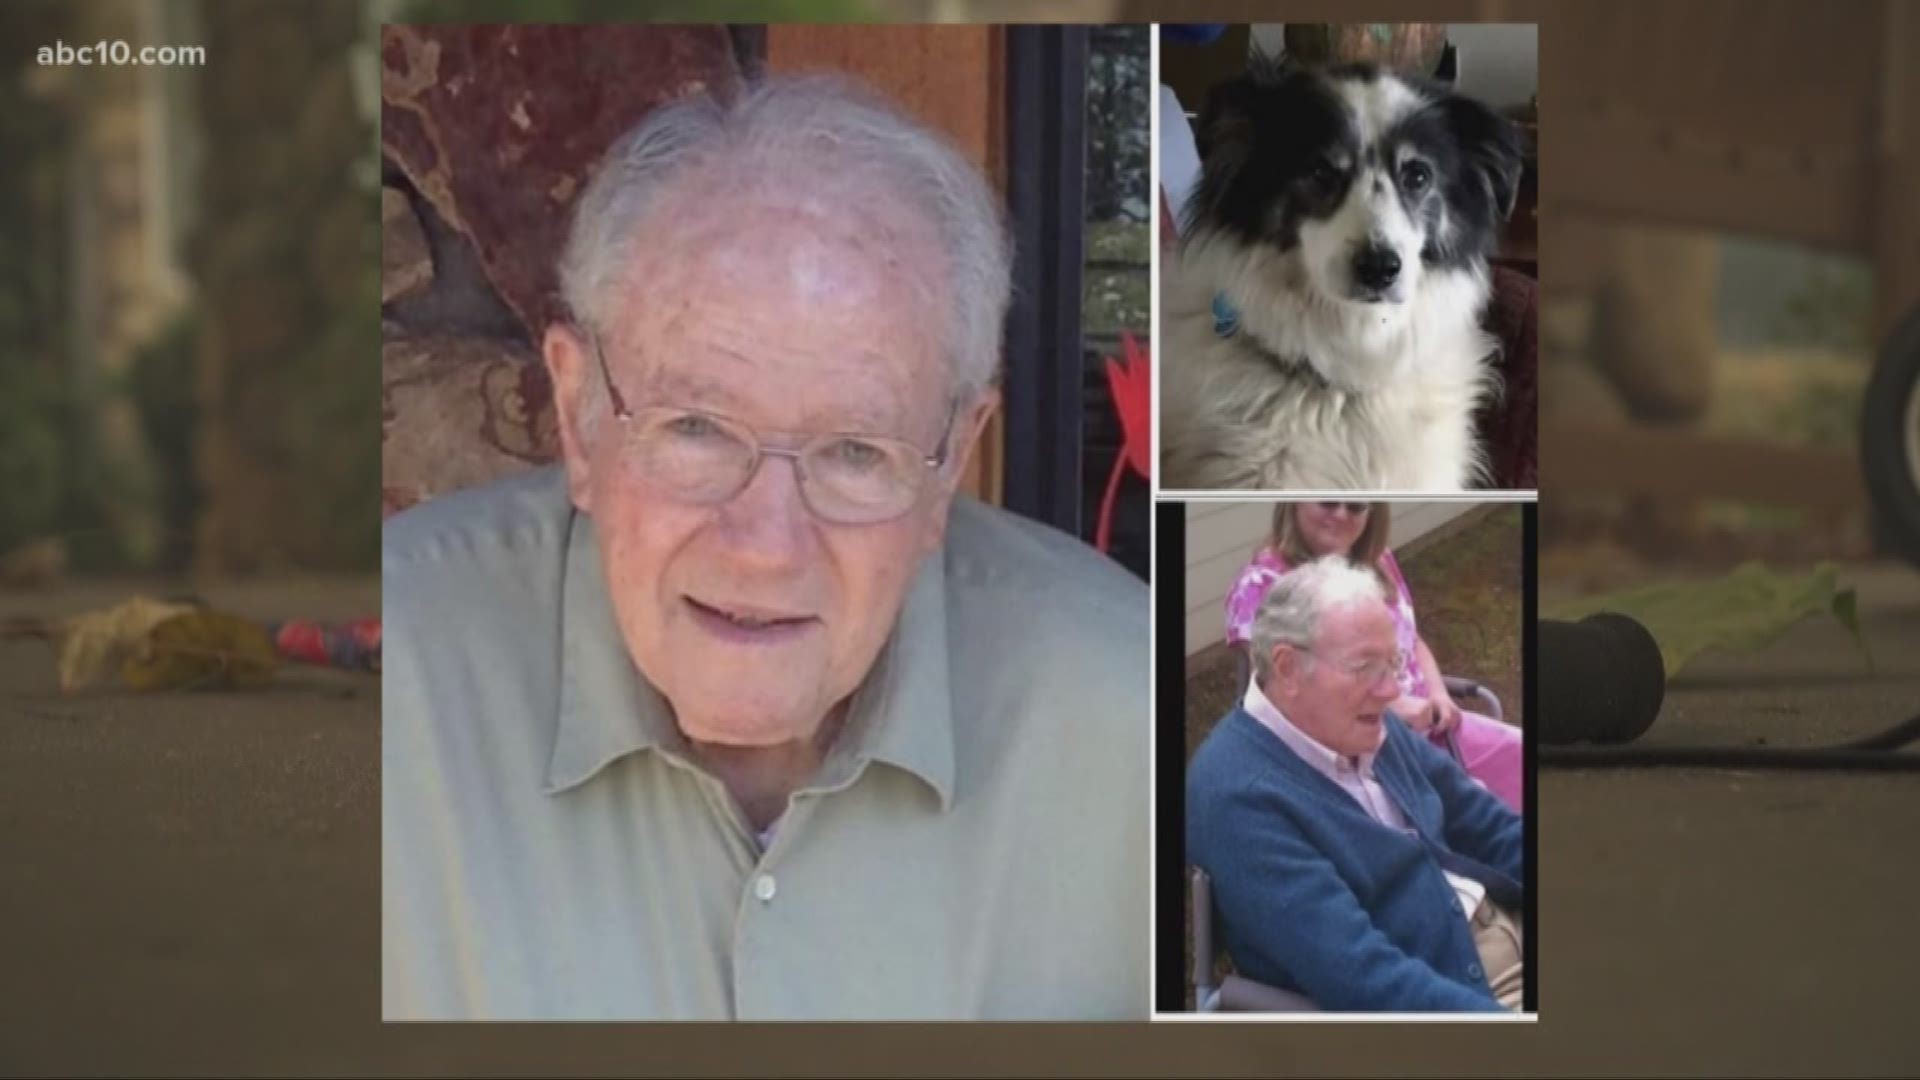 Julian Binstock lived in Paradise with his dog, Jack, until the Camp Fire tore through on November 8. His family later learned he died in the fire at his cottage home at the retirement community.